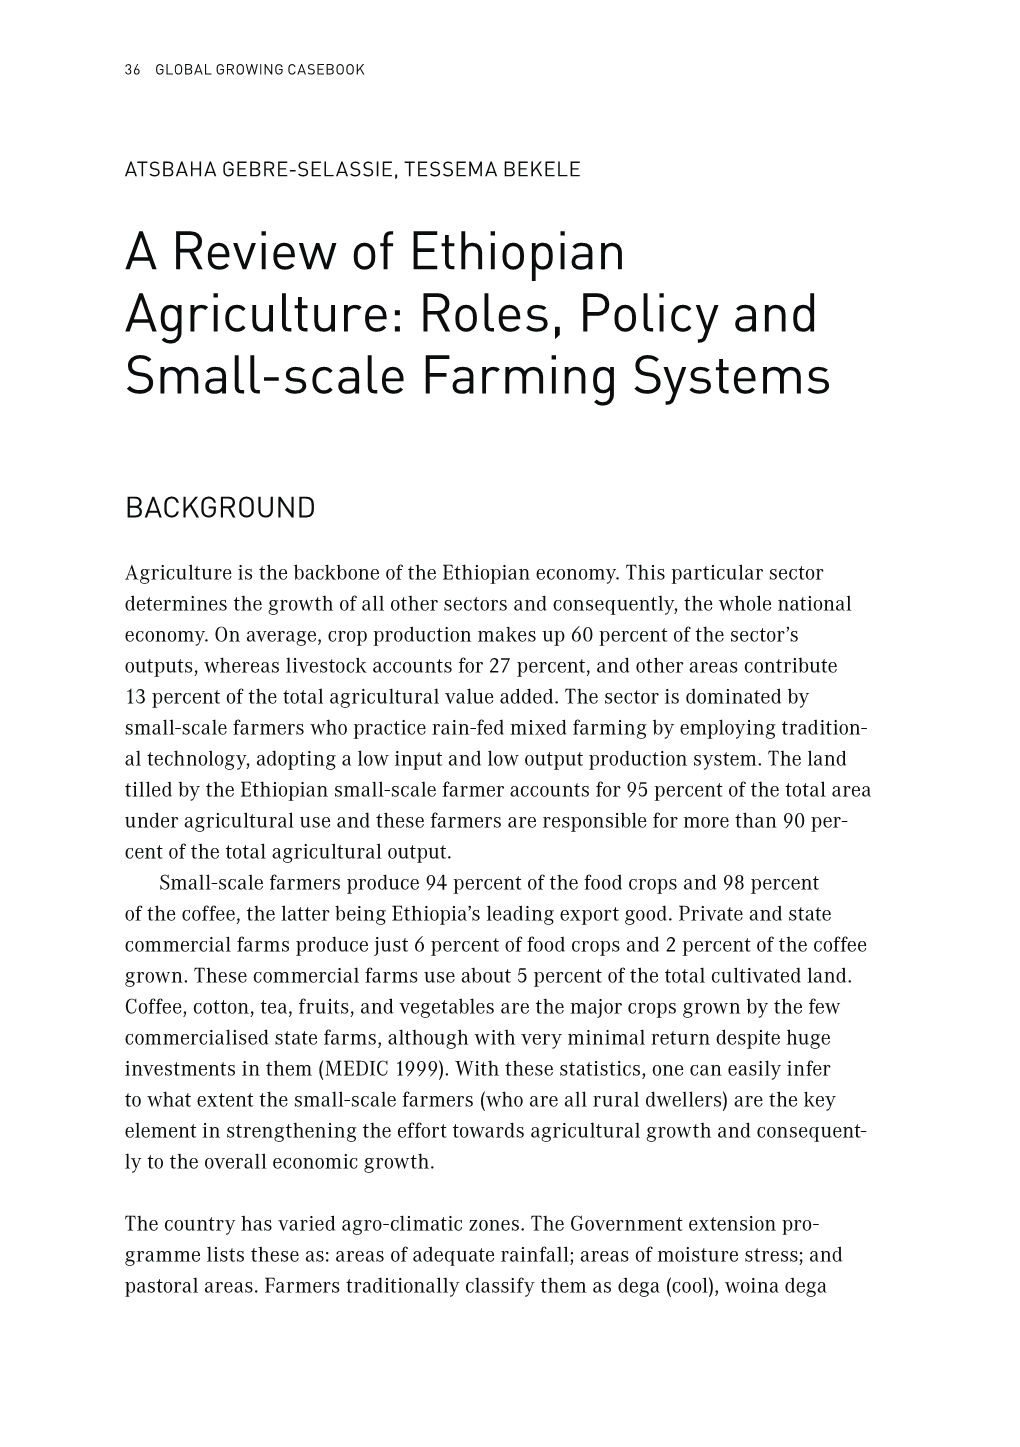 A Review of Ethiopian Agriculture: Roles, Policy and Small-Scale Farming Systems